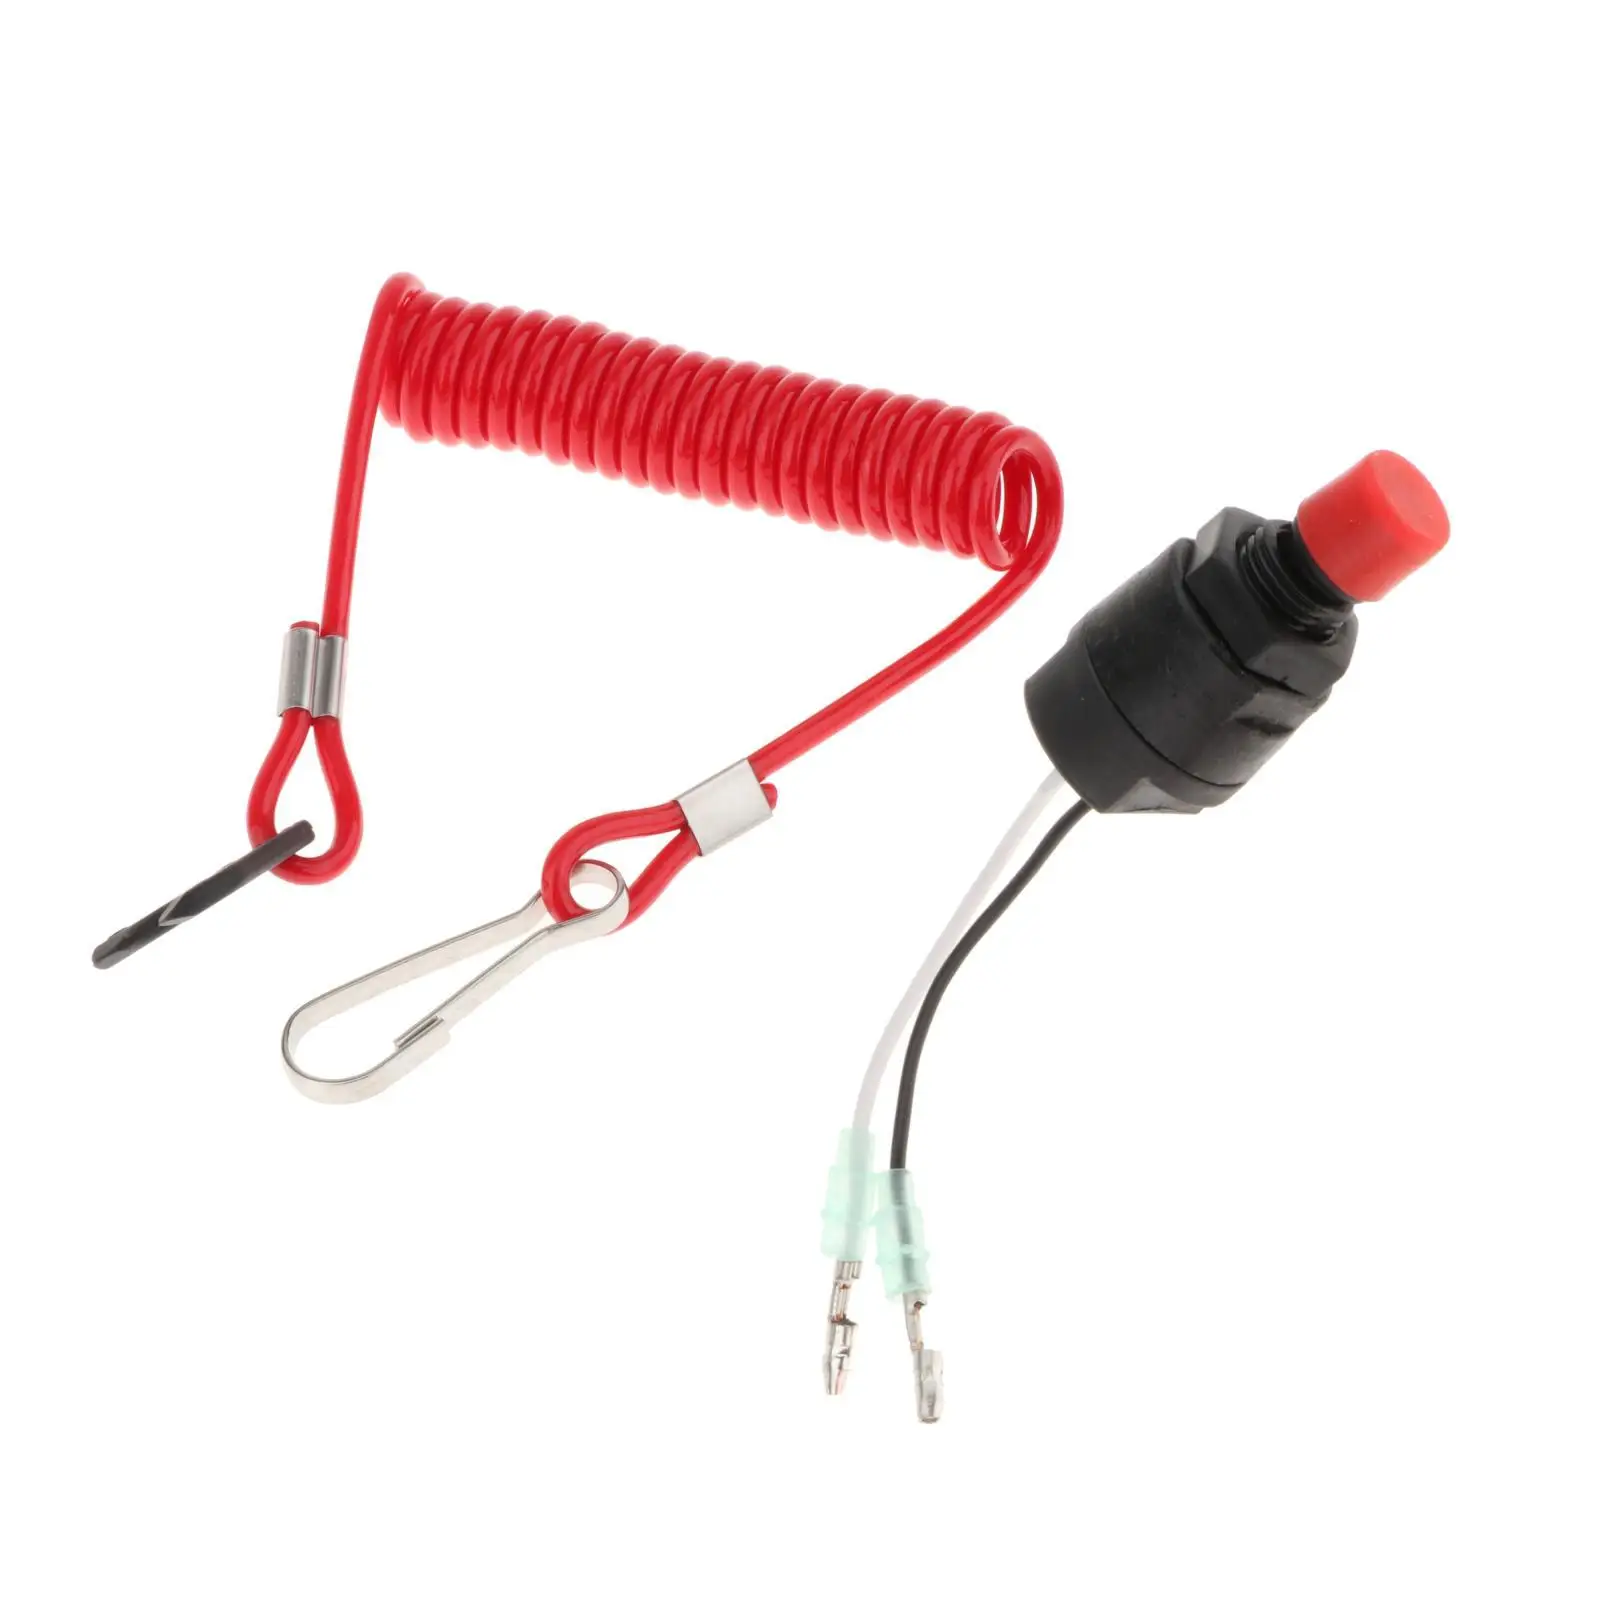 Kill Stop Switch & Safety Lanyard Replacement Assy for Yamaha Outboard Engine Boat Parts High Performance Easy Installation